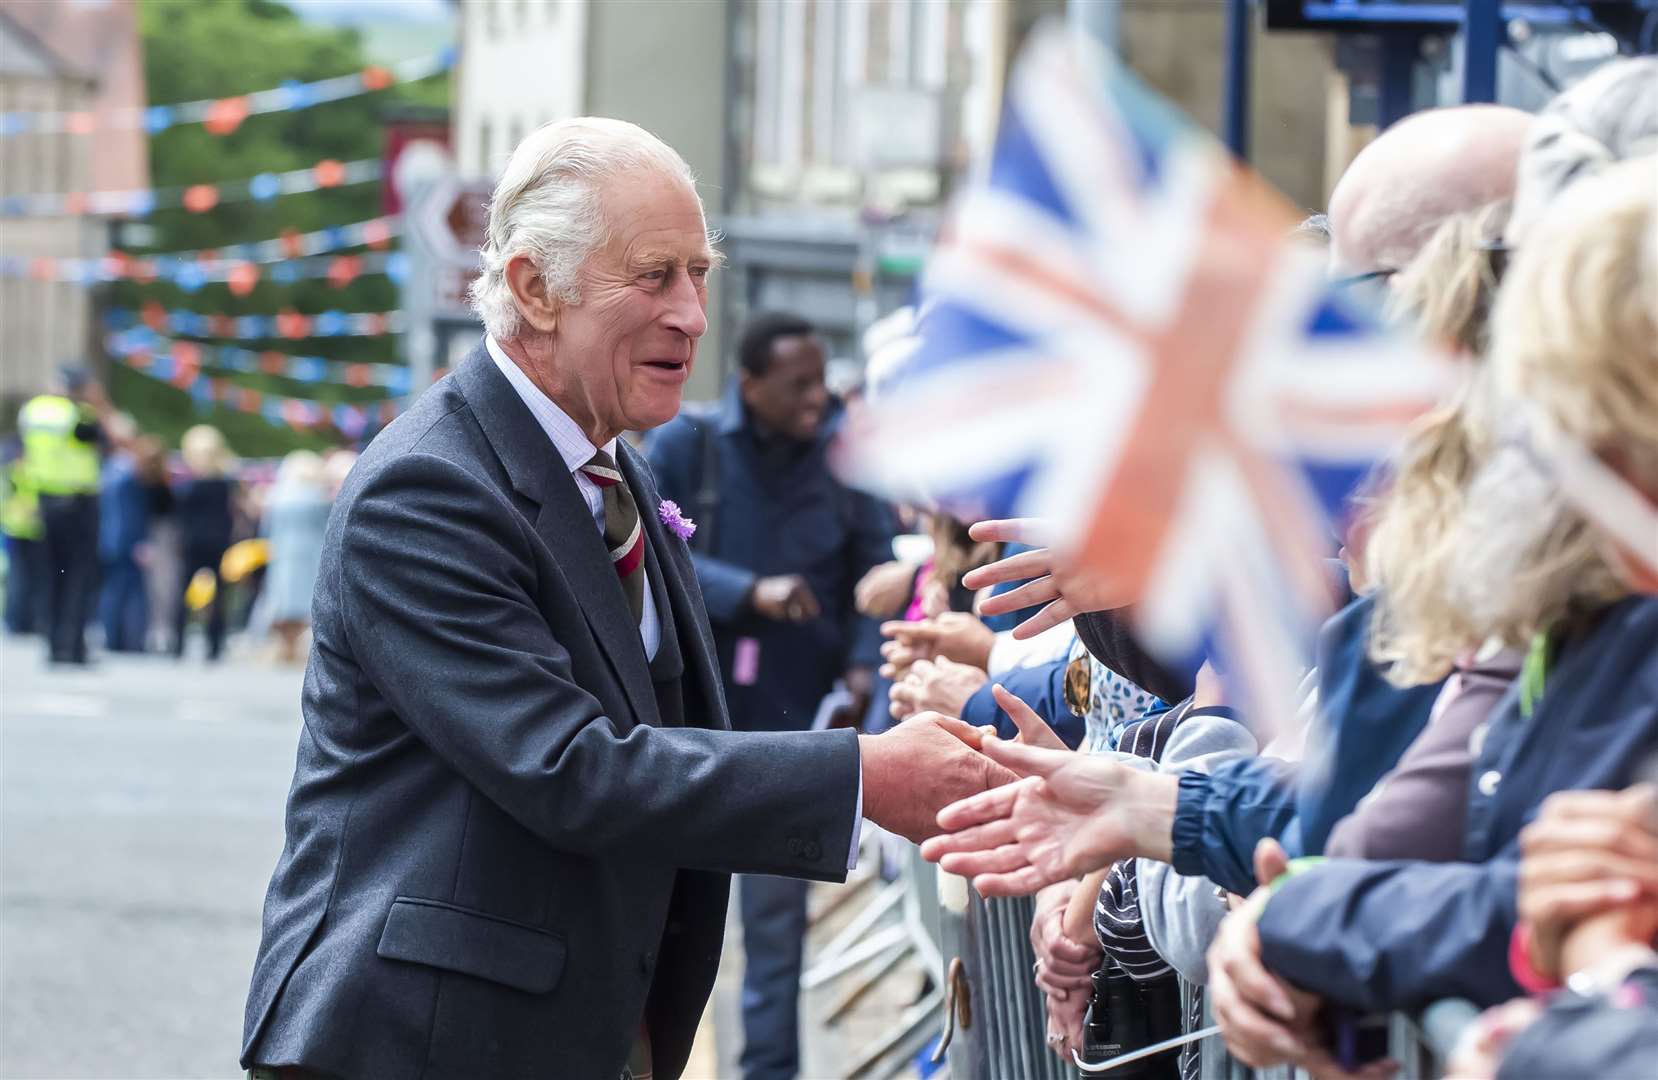 The King spent time greeting well-wishers (Lisa Ferguson/PA)